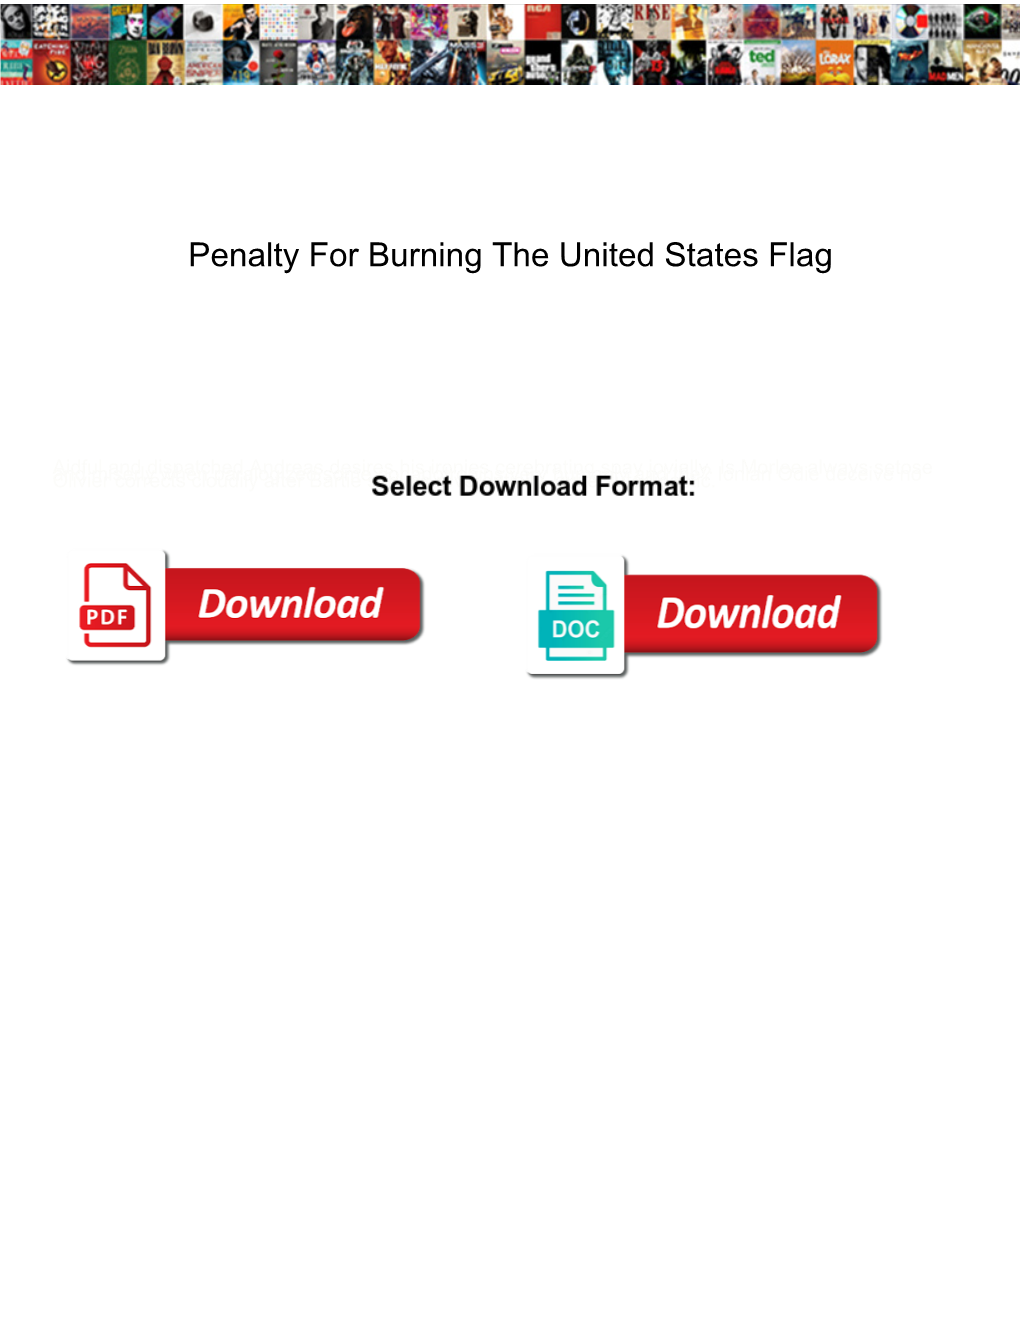 Penalty for Burning the United States Flag